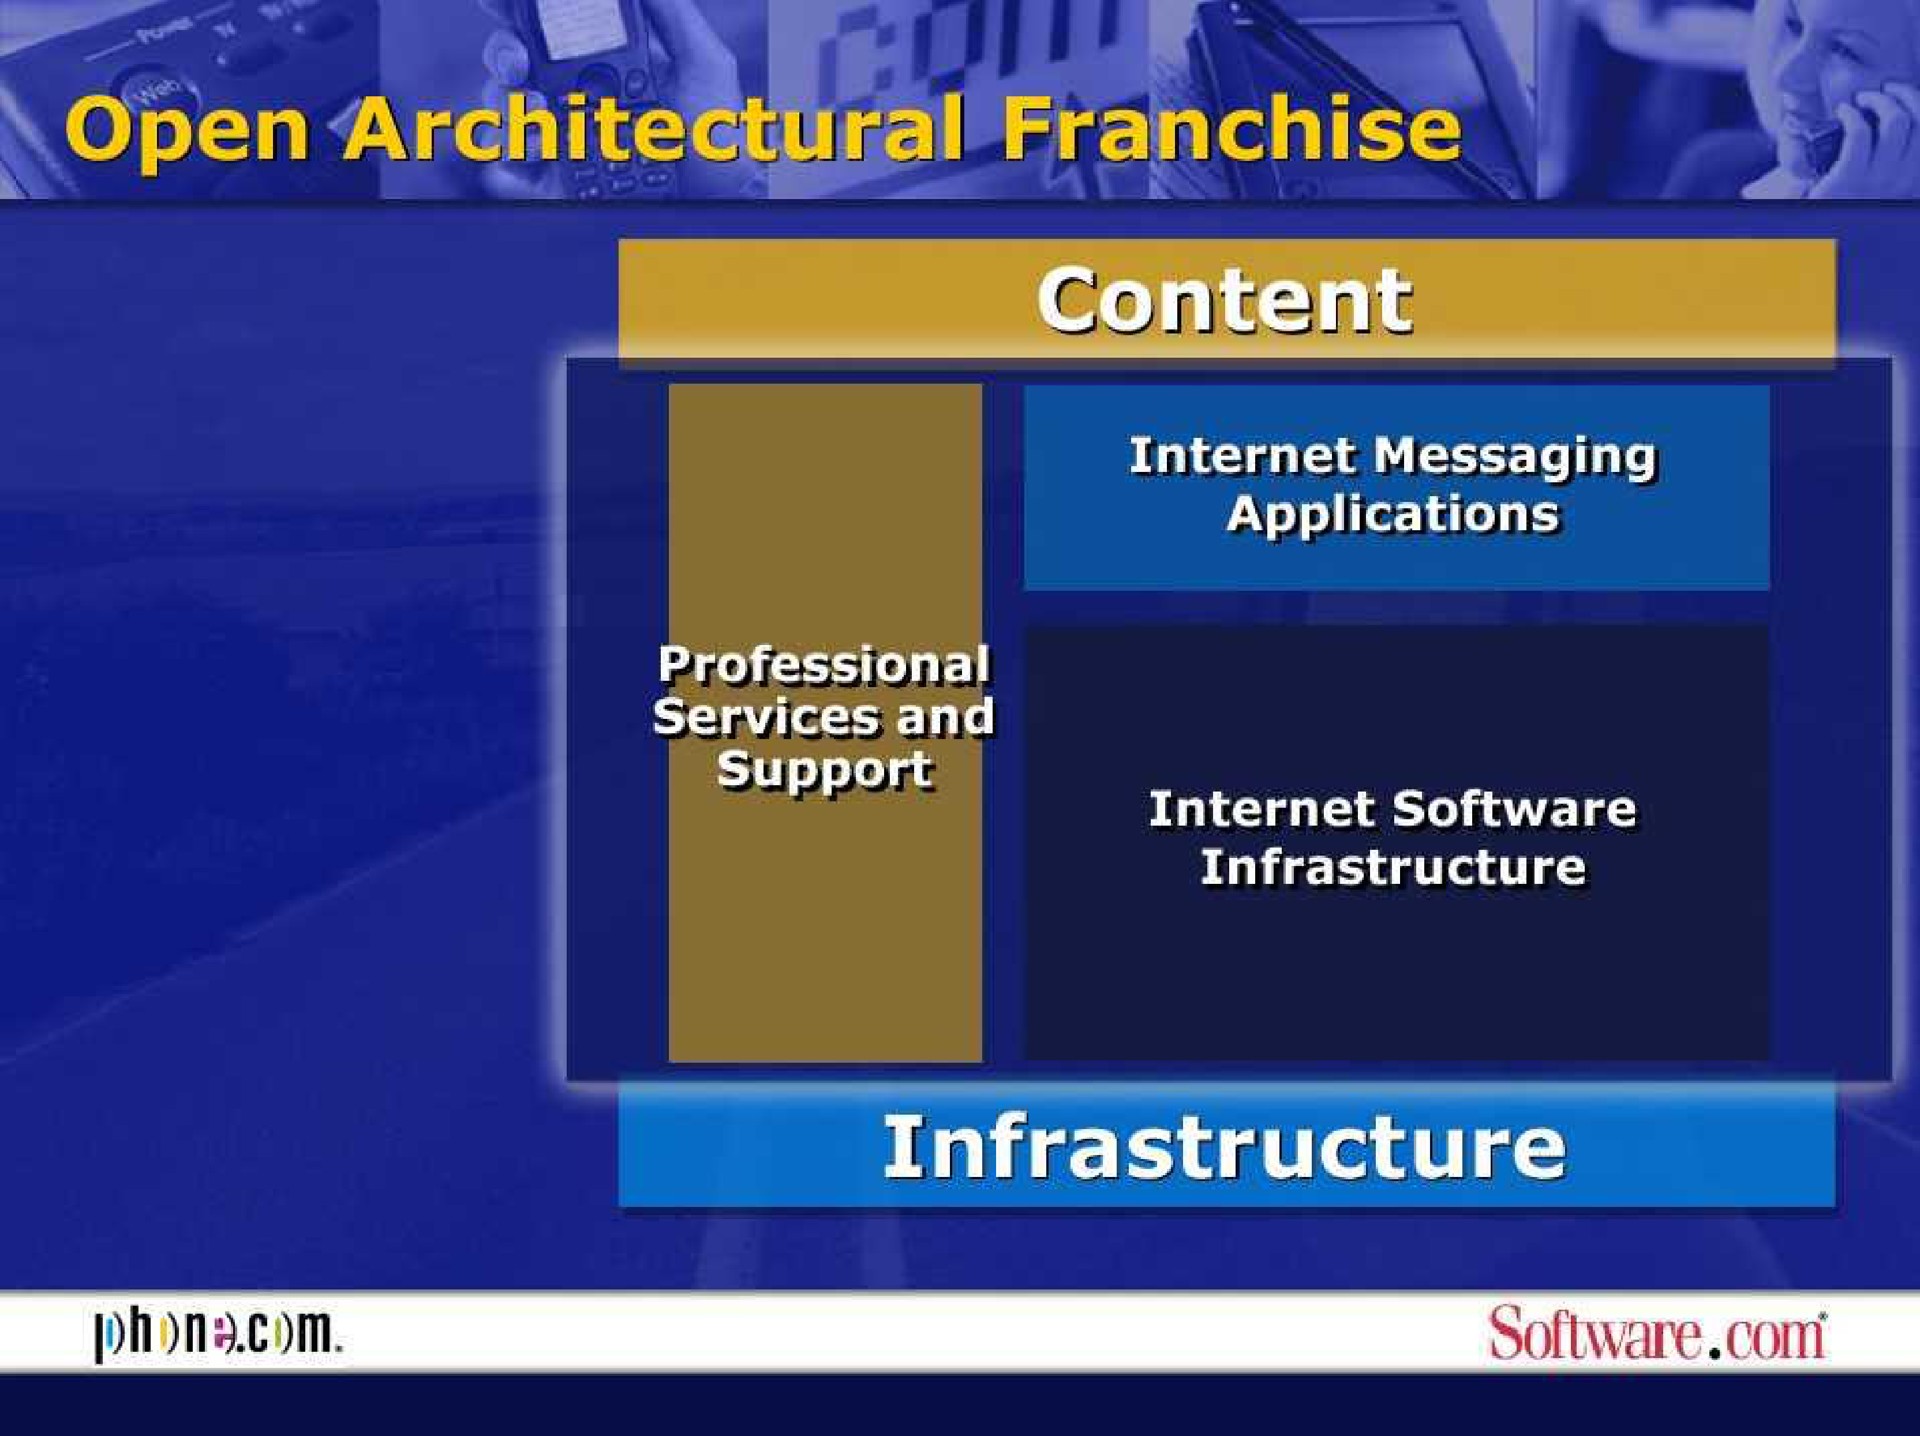 open architectural franchise at infrastructure | Phone.com